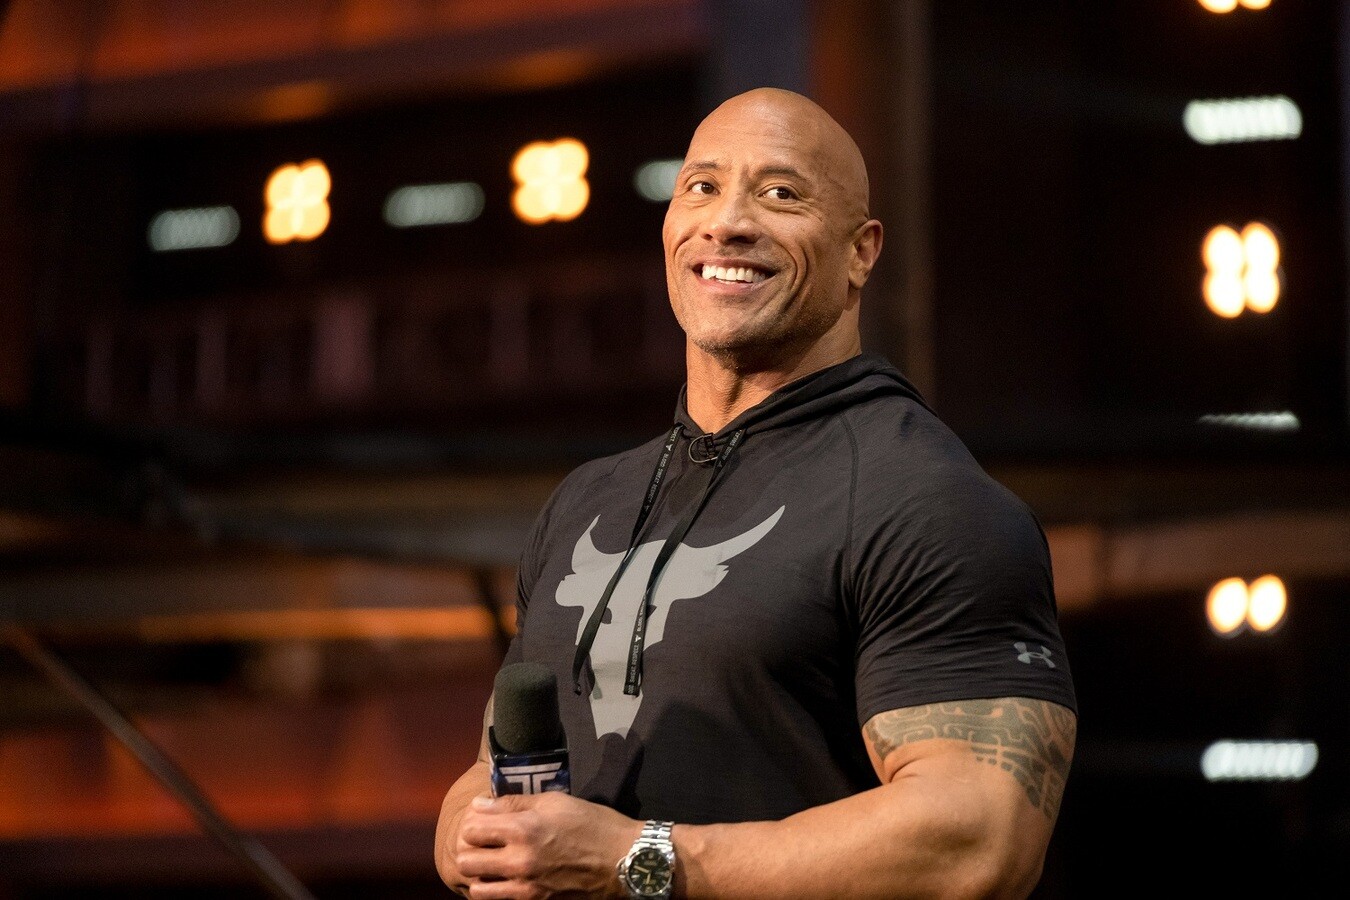 Dwayne Johnson might be one of Hollywood's highest paid actors, but that doesn't mean all his movies were box office hits. Check out his worst films here.